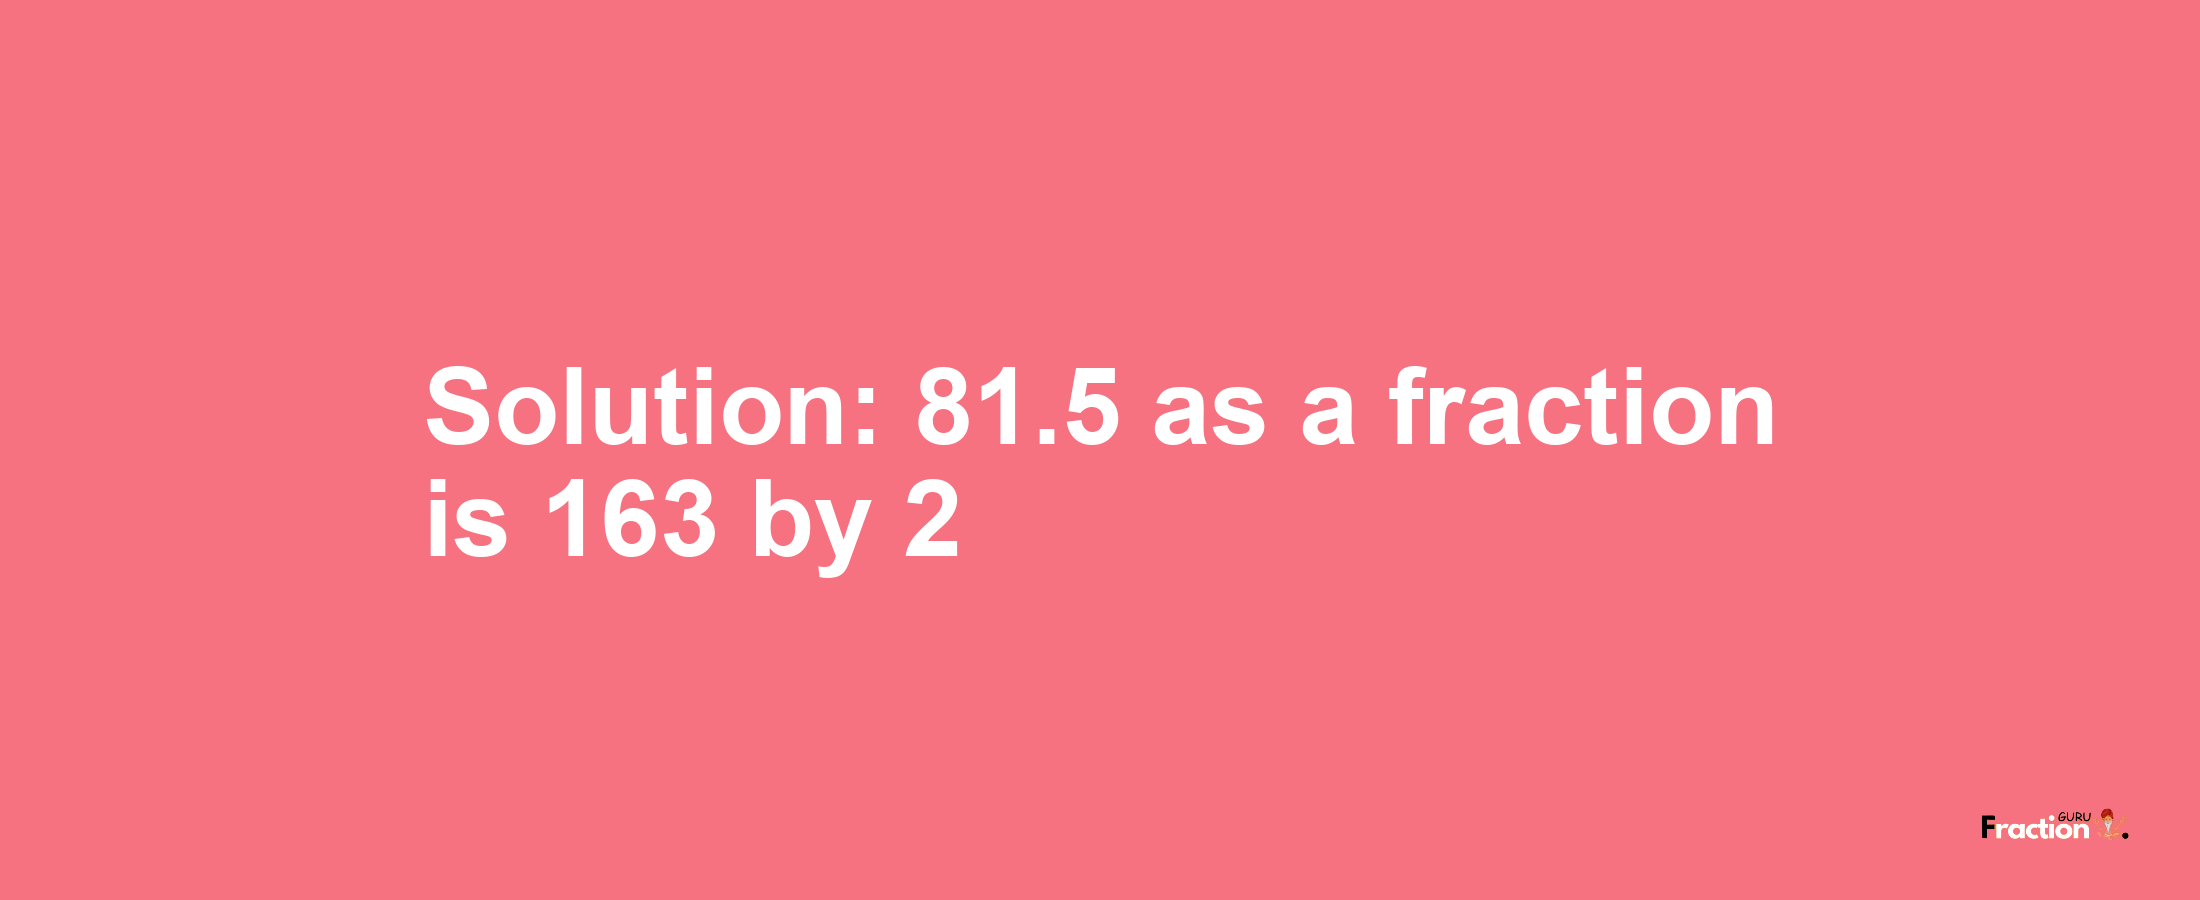 Solution:81.5 as a fraction is 163/2